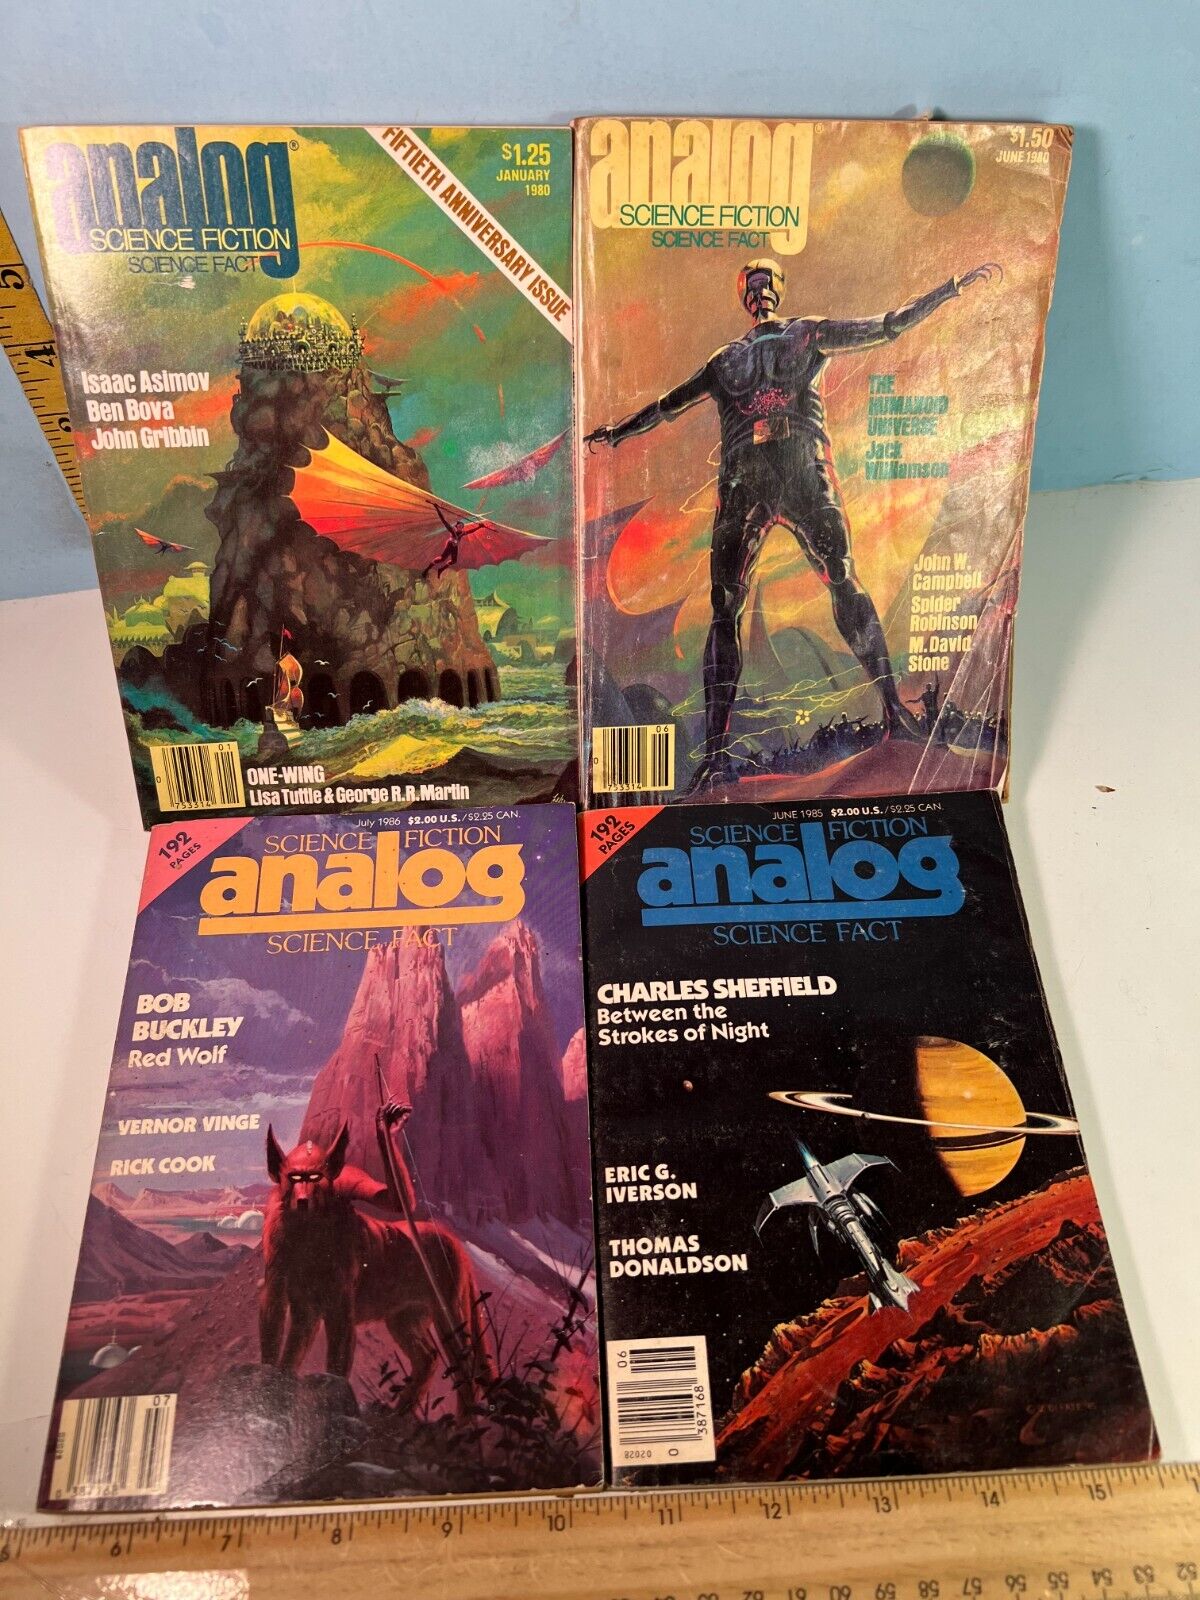 1985-86 Analog Science Fiction Science Fact Magazine Lot of 4